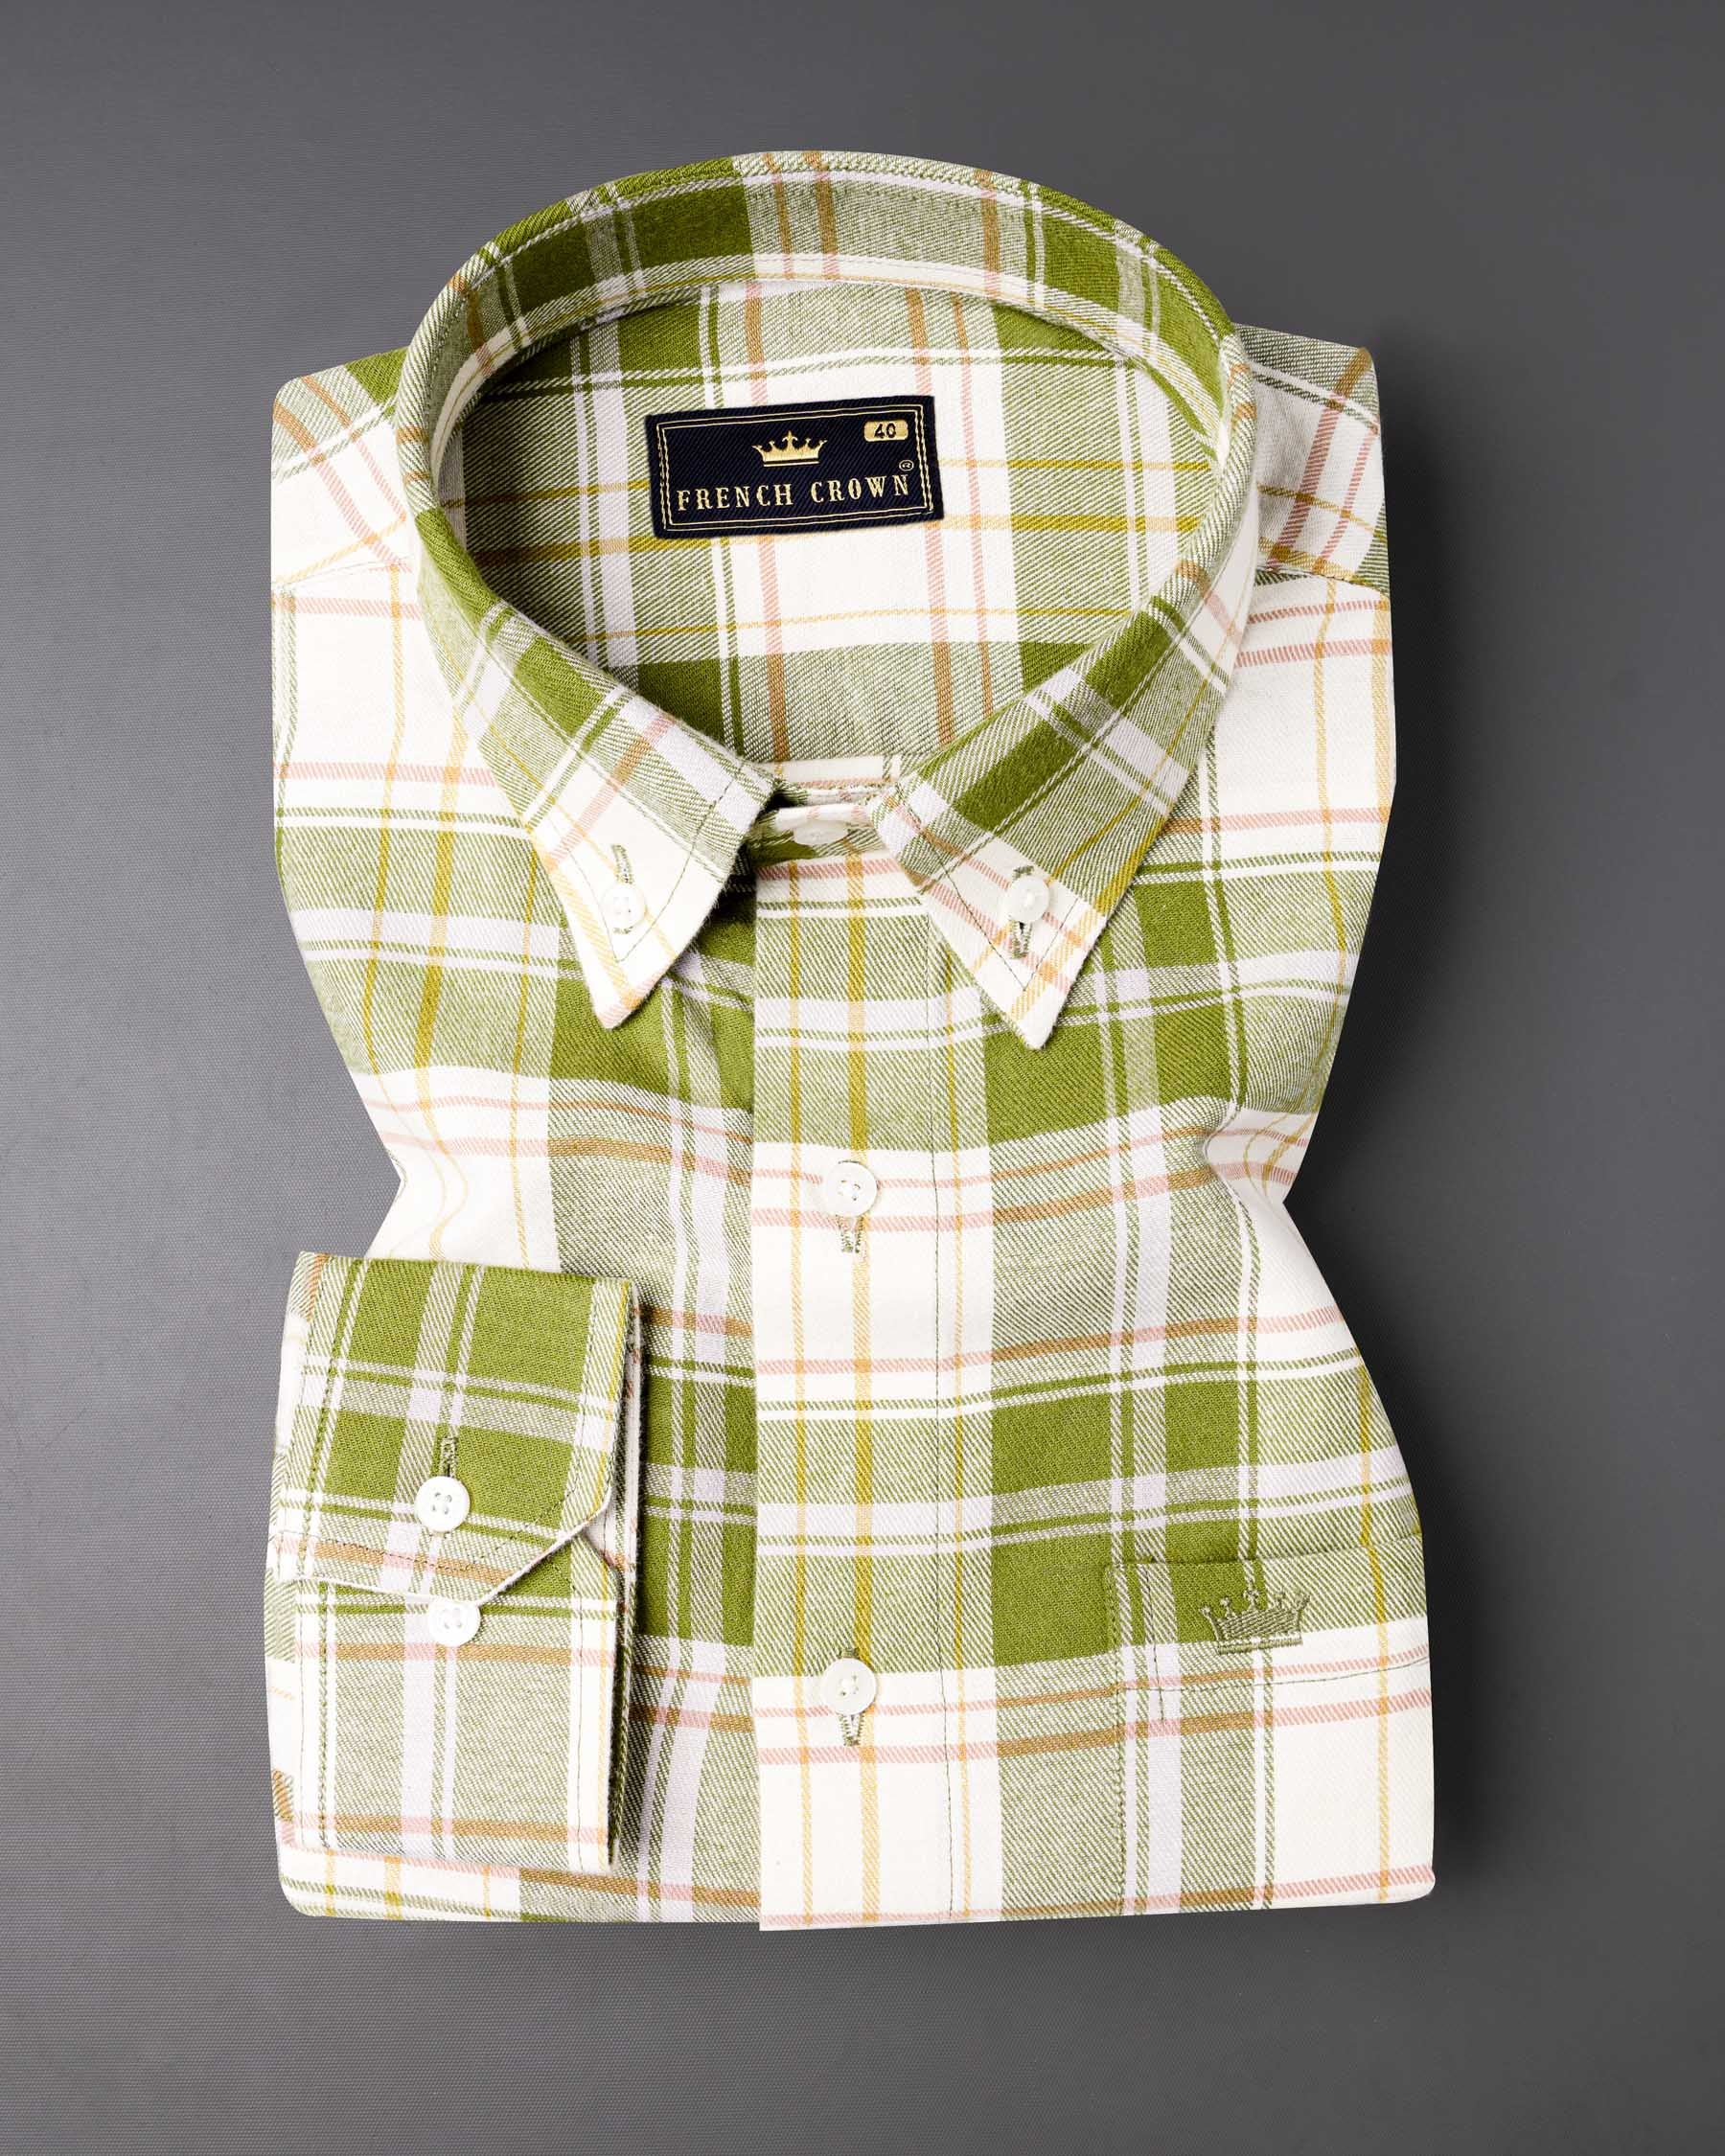 Moccasin Green and White Plaid Flannel Shirt 6984-BD-38,6984-BD-38,6984-BD-39,6984-BD-39,6984-BD-40,6984-BD-40,6984-BD-42,6984-BD-42,6984-BD-44,6984-BD-44,6984-BD-46,6984-BD-46,6984-BD-48,6984-BD-48,6984-BD-50,6984-BD-50,6984-BD-52,6984-BD-52